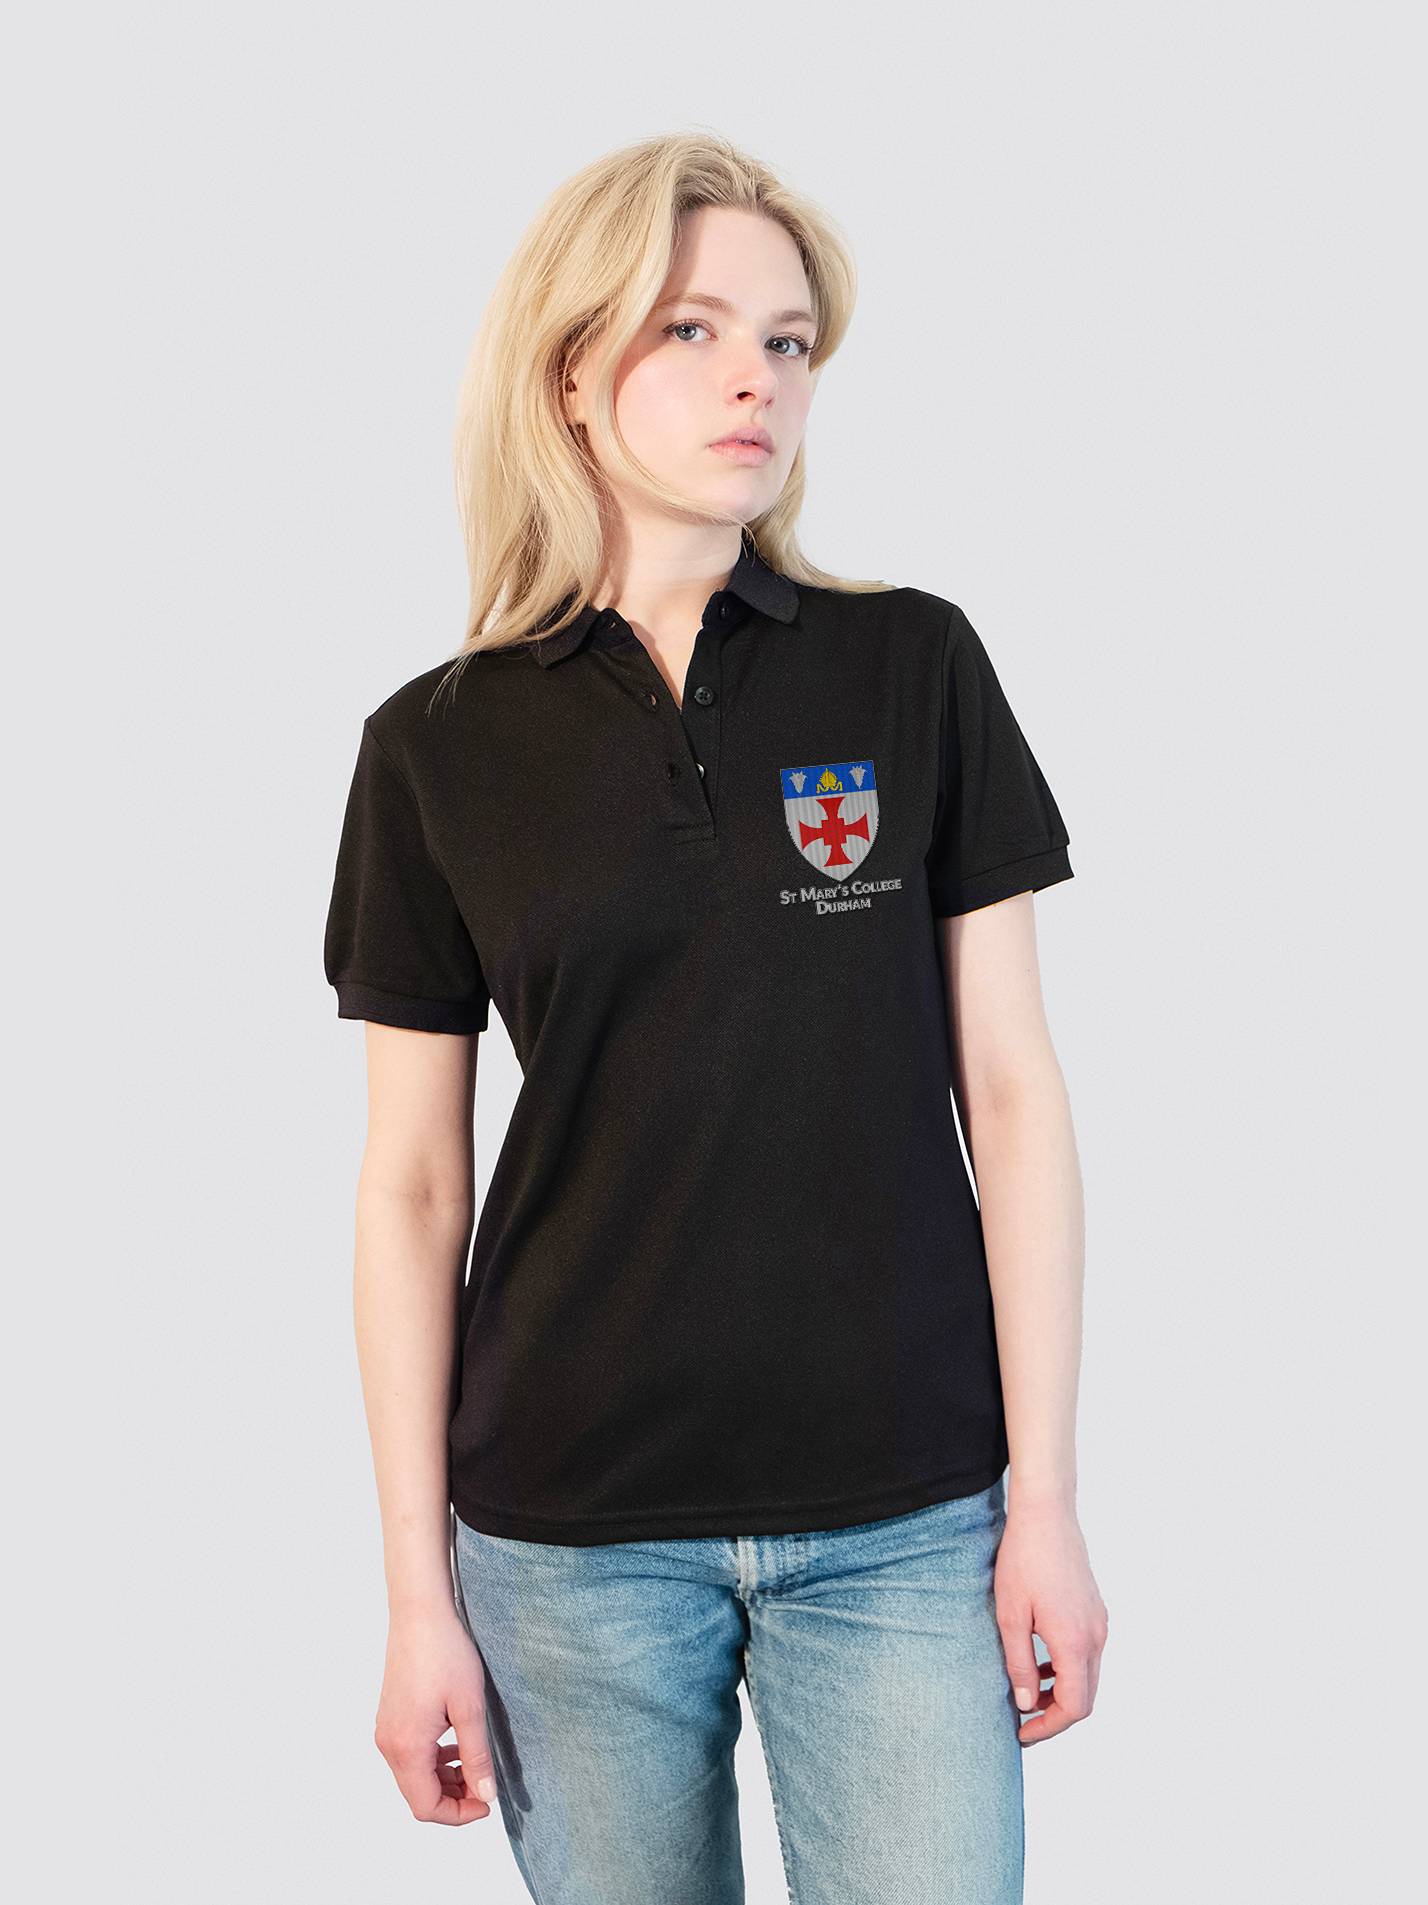 St Mary's College Durham Sustainable Ladies Polo Shirt